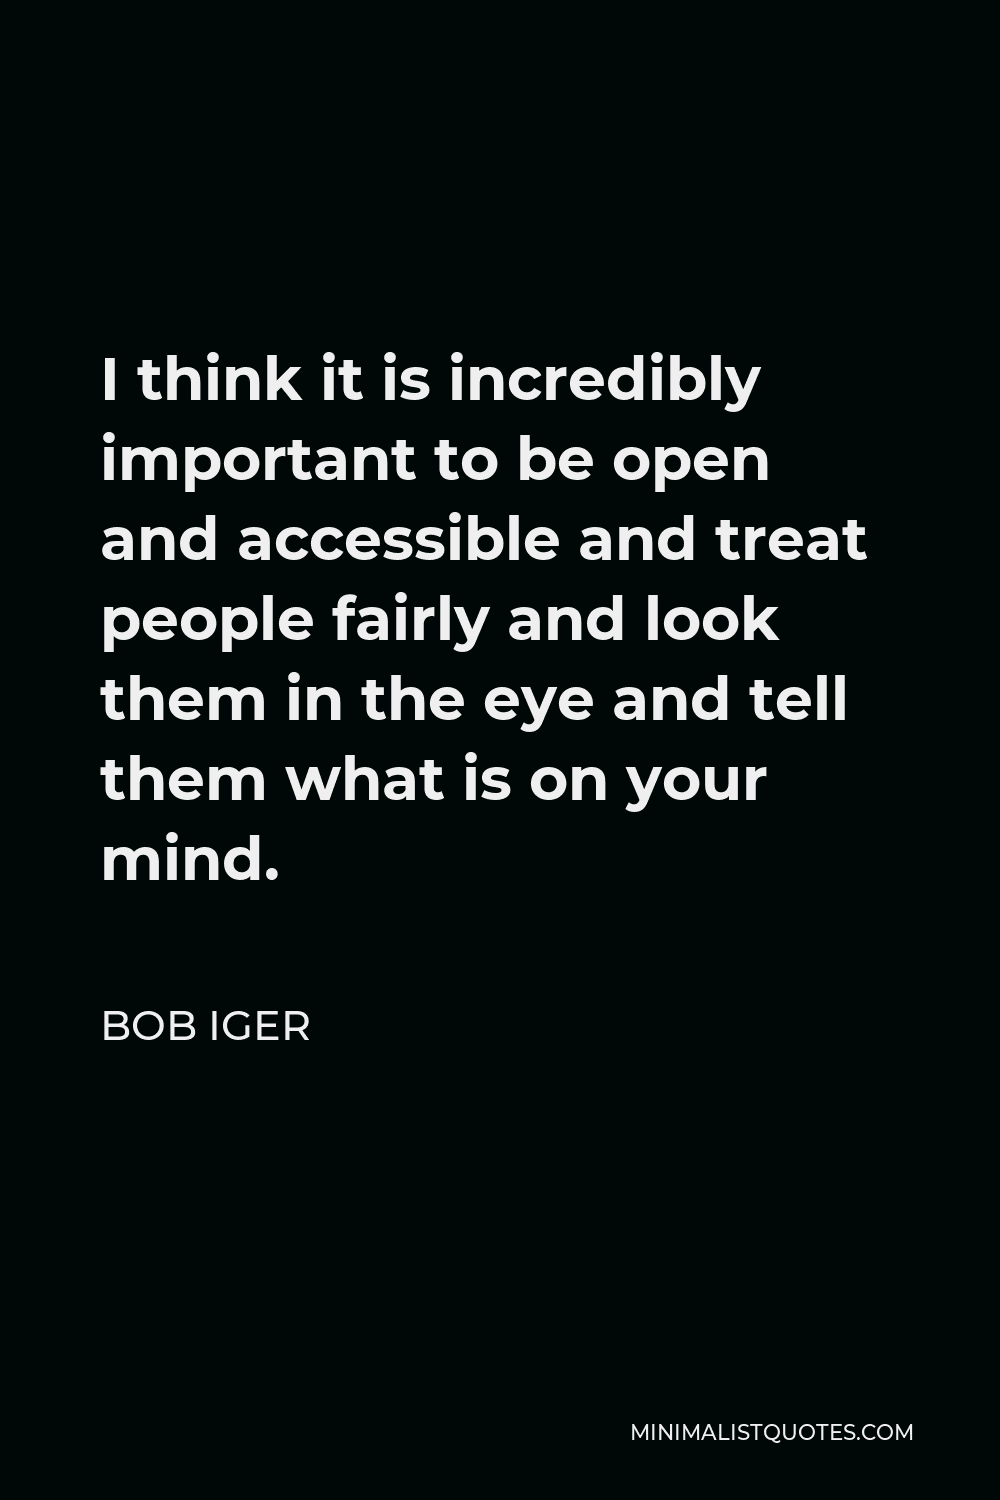 Bob Iger Quote - I think it is incredibly important to be open and accessible and treat people fairly and look them in the eye and tell them what is on your mind.